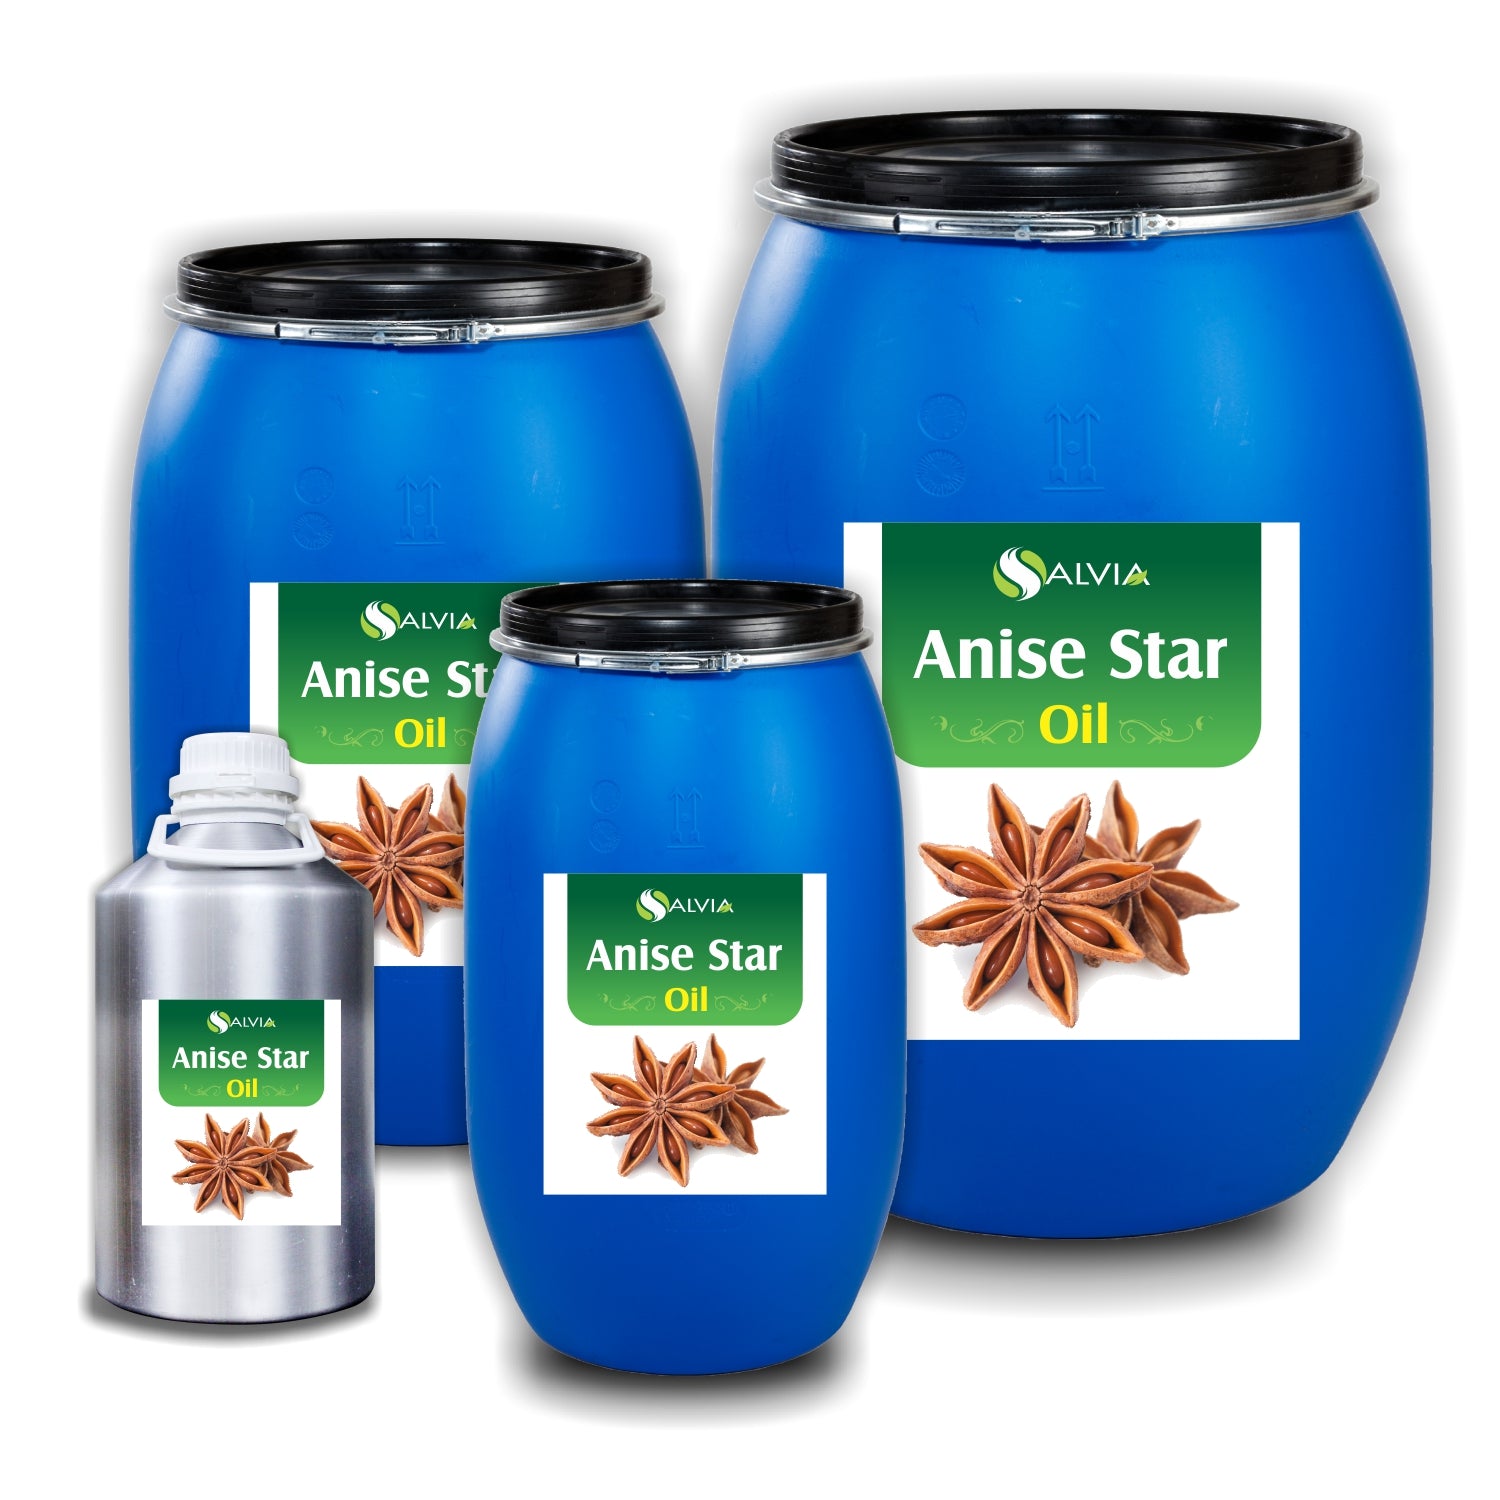 Salvia Natural Essential Oils 1000ml Anise Star Essential Oil, 100% Pure Undiluted & Natural, For Aromatherapy, Eases Cough & Cold, Reduces Tension, Diminishes Acne